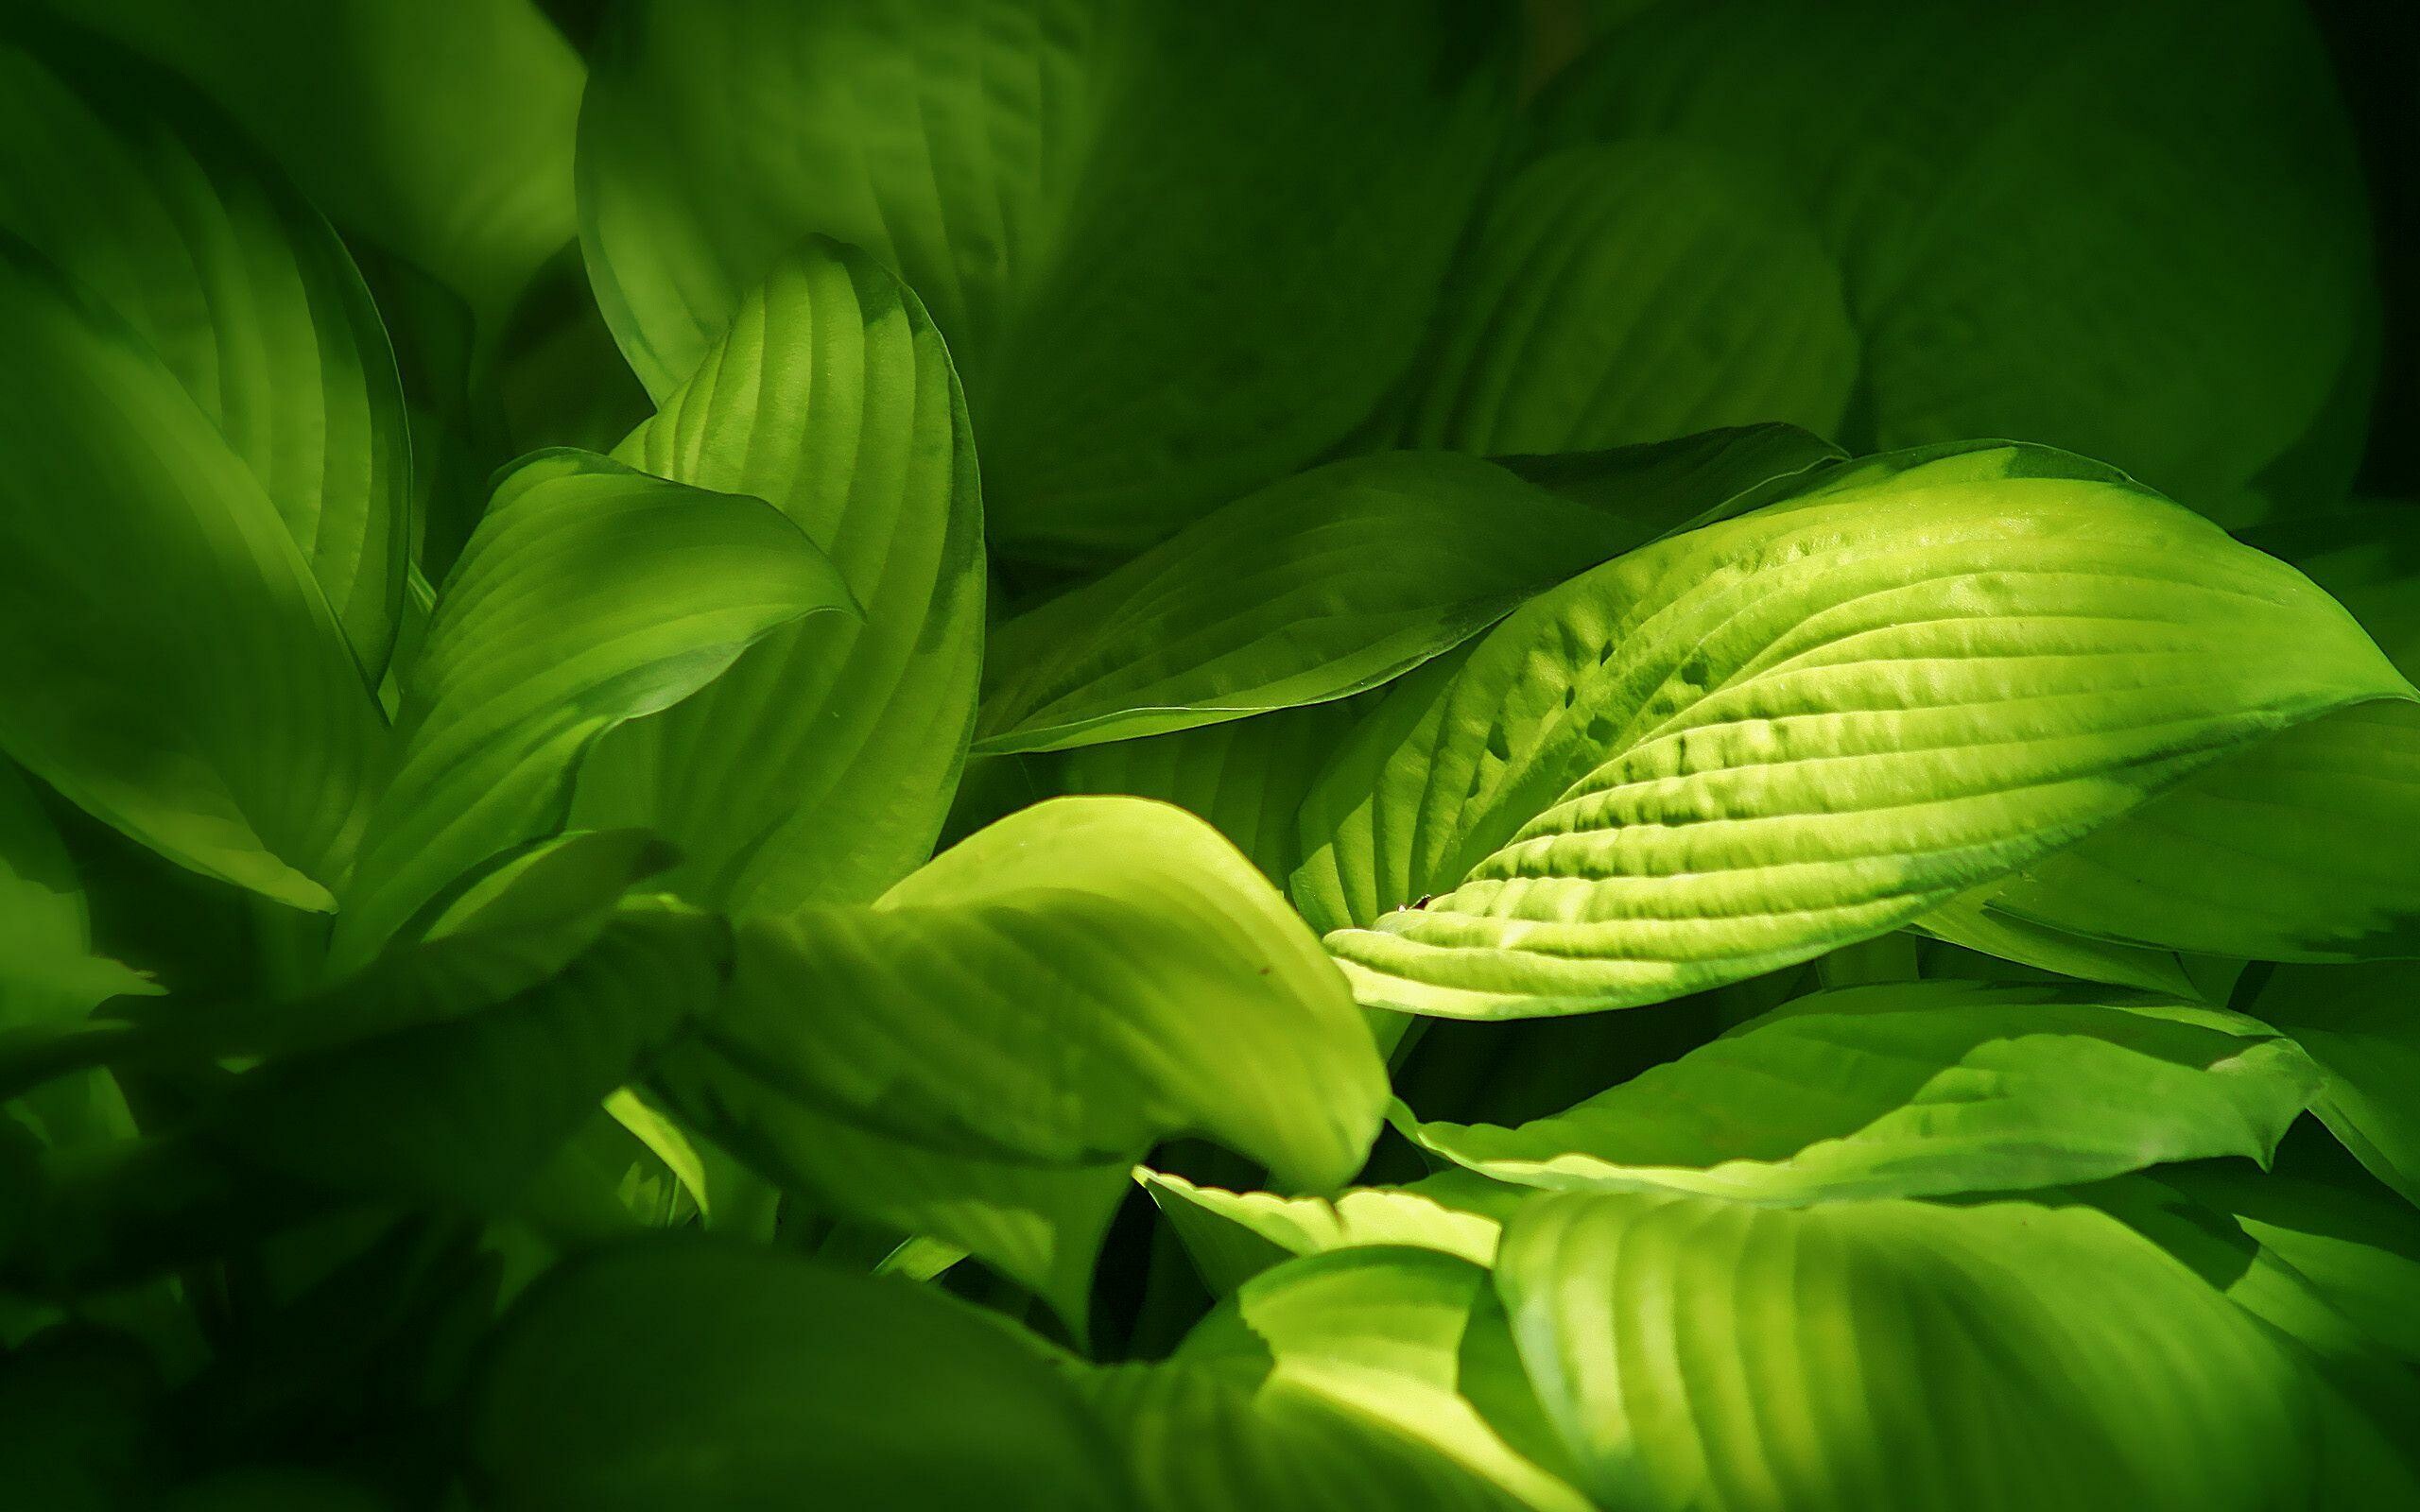 Leaves: Plant growth, Photosynthesis, Food manufacturing process in green plants. 2560x1600 HD Wallpaper.